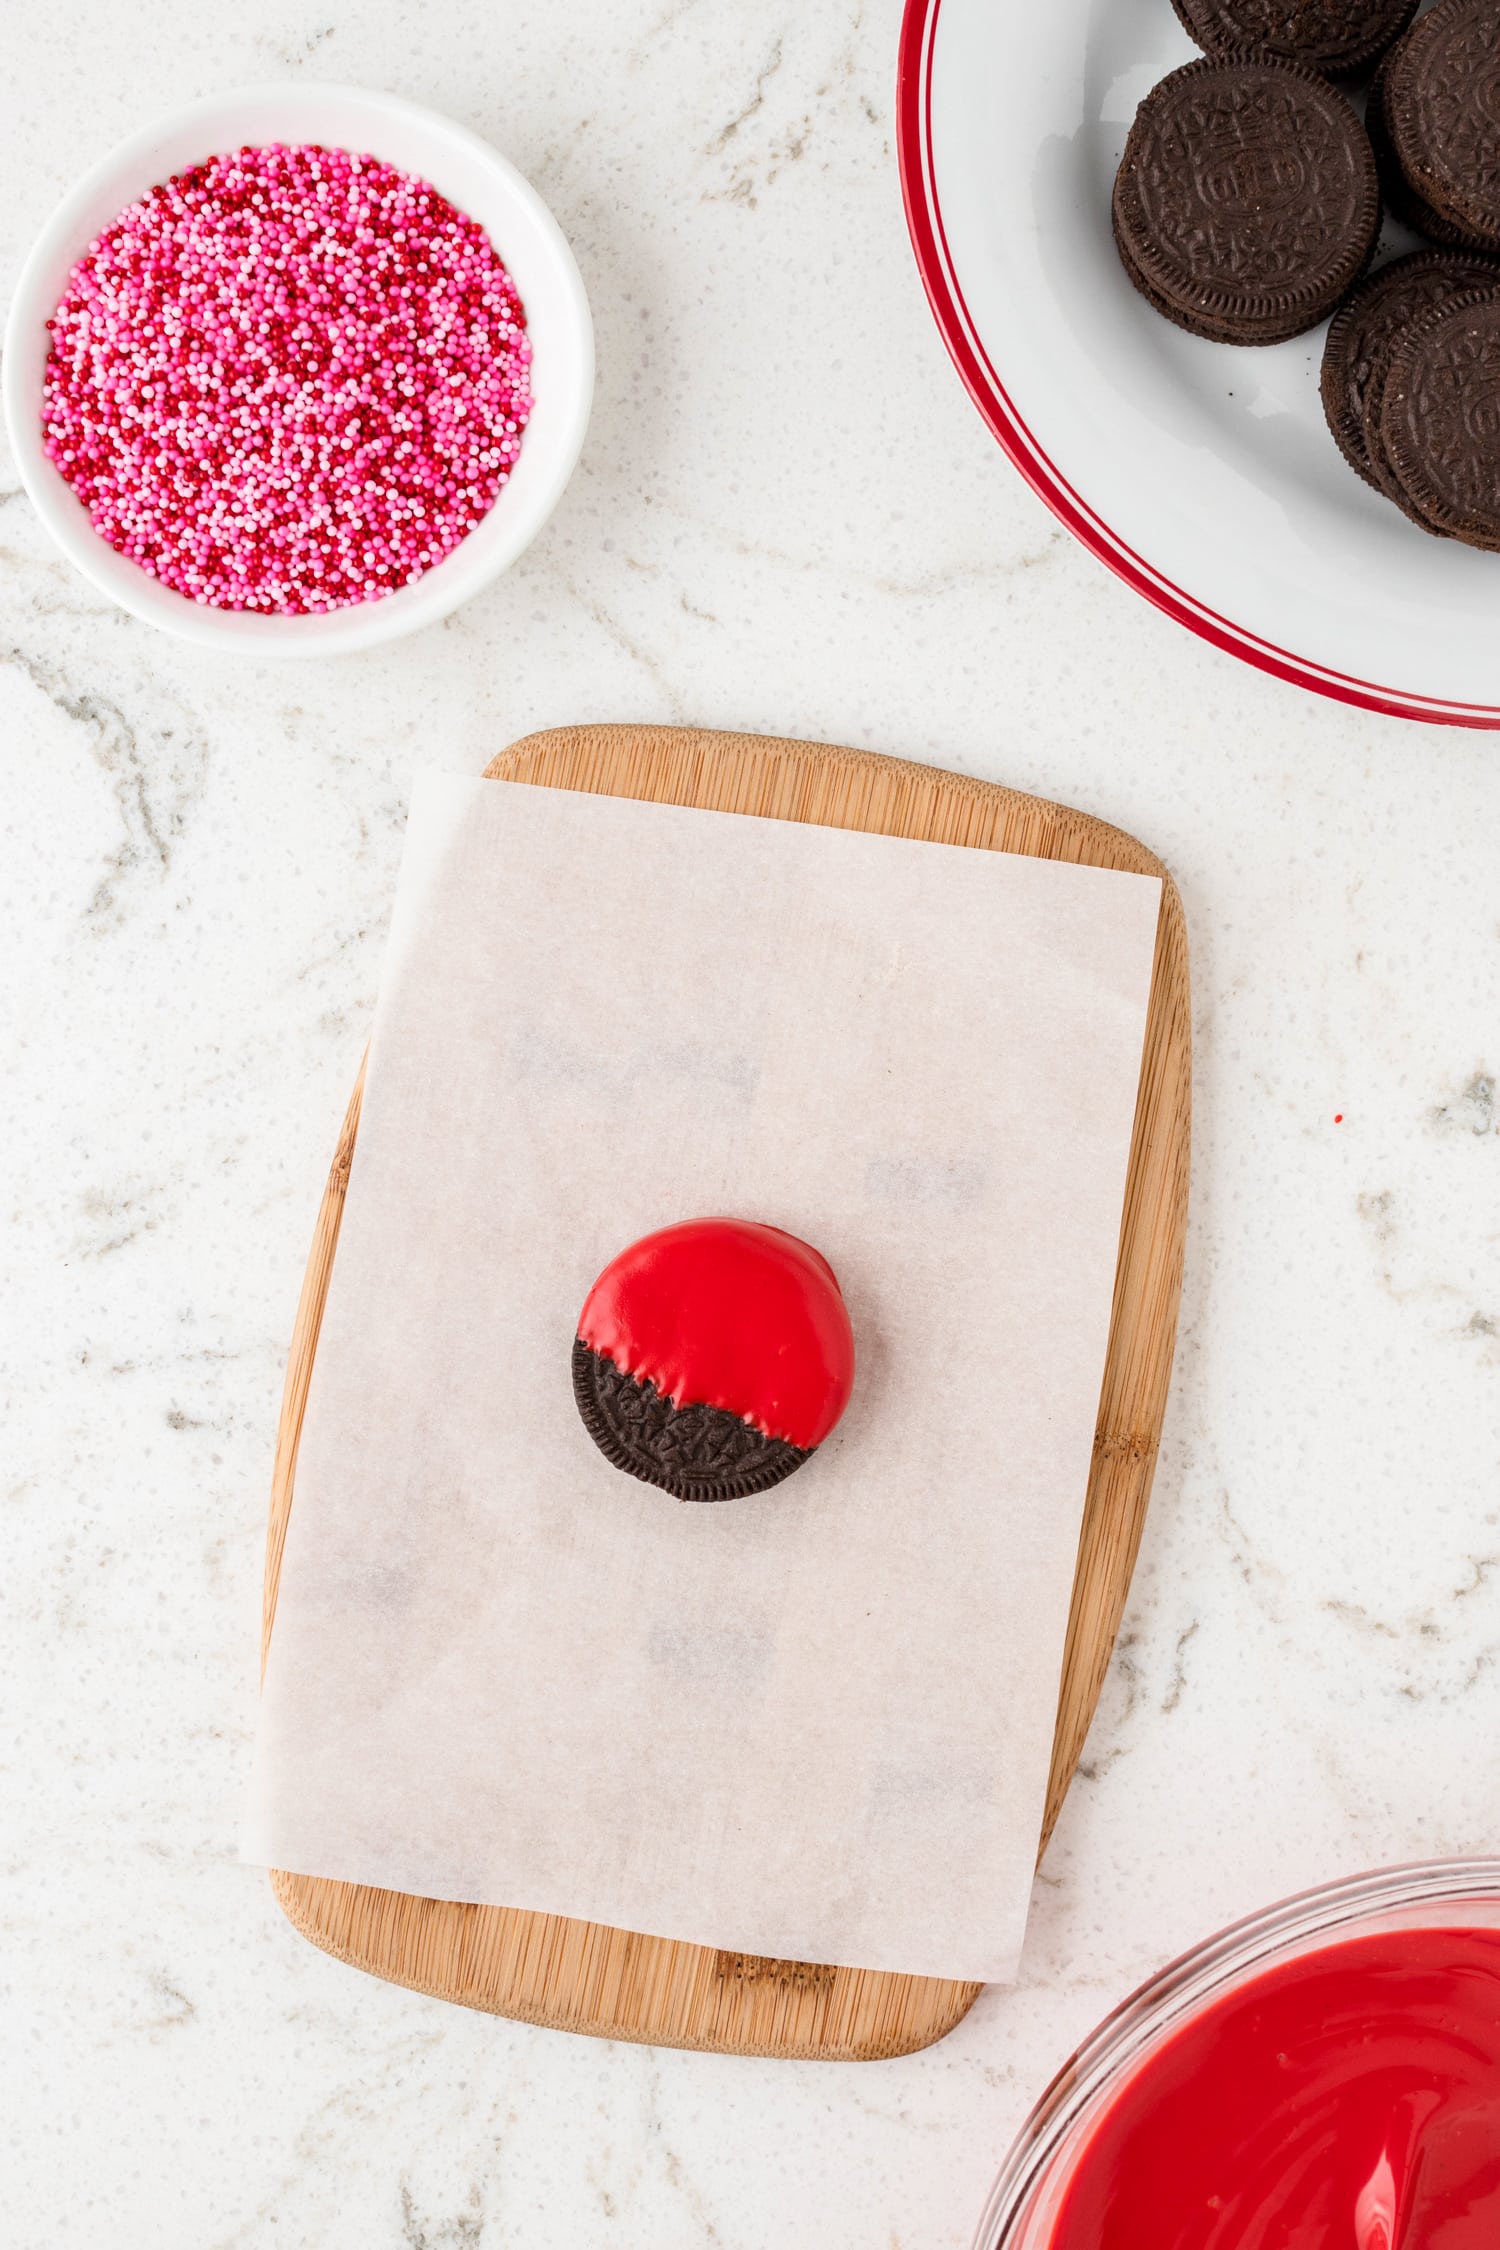 Dipped oreo cookie into melted red candy melt and laying on parchment paper